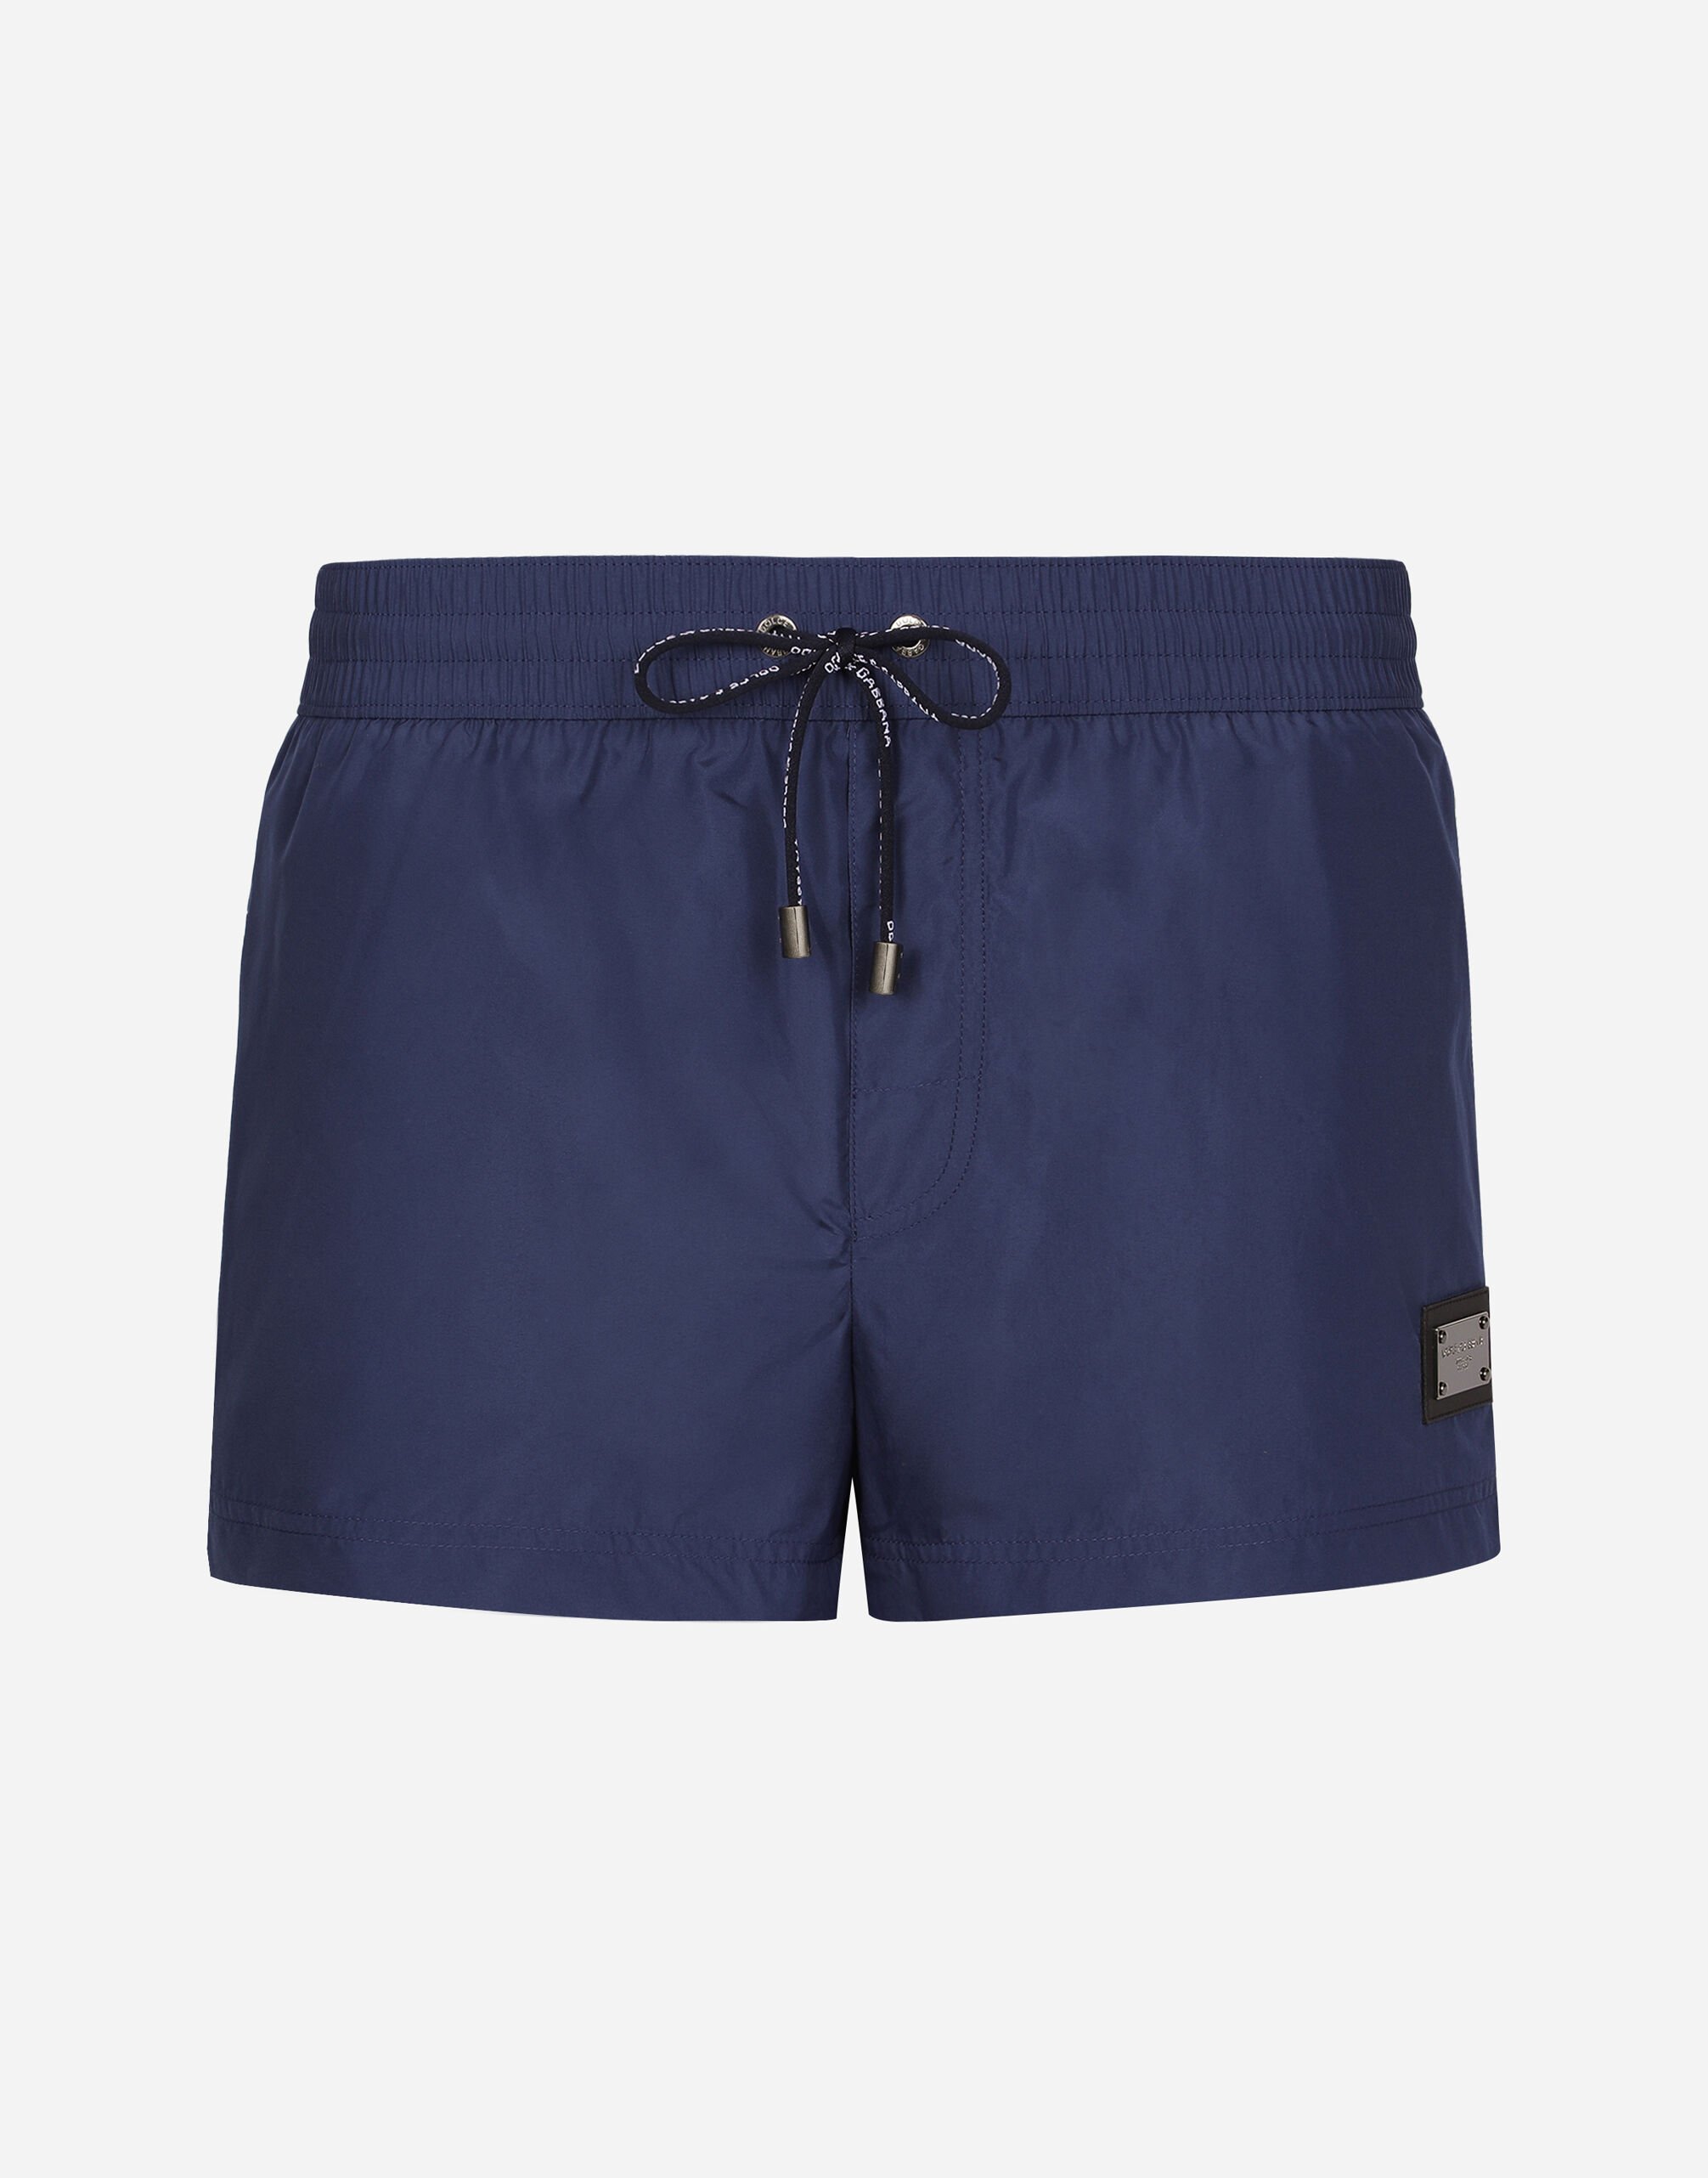 ${brand} Short swim trunks with branded tag ${colorDescription} ${masterID}